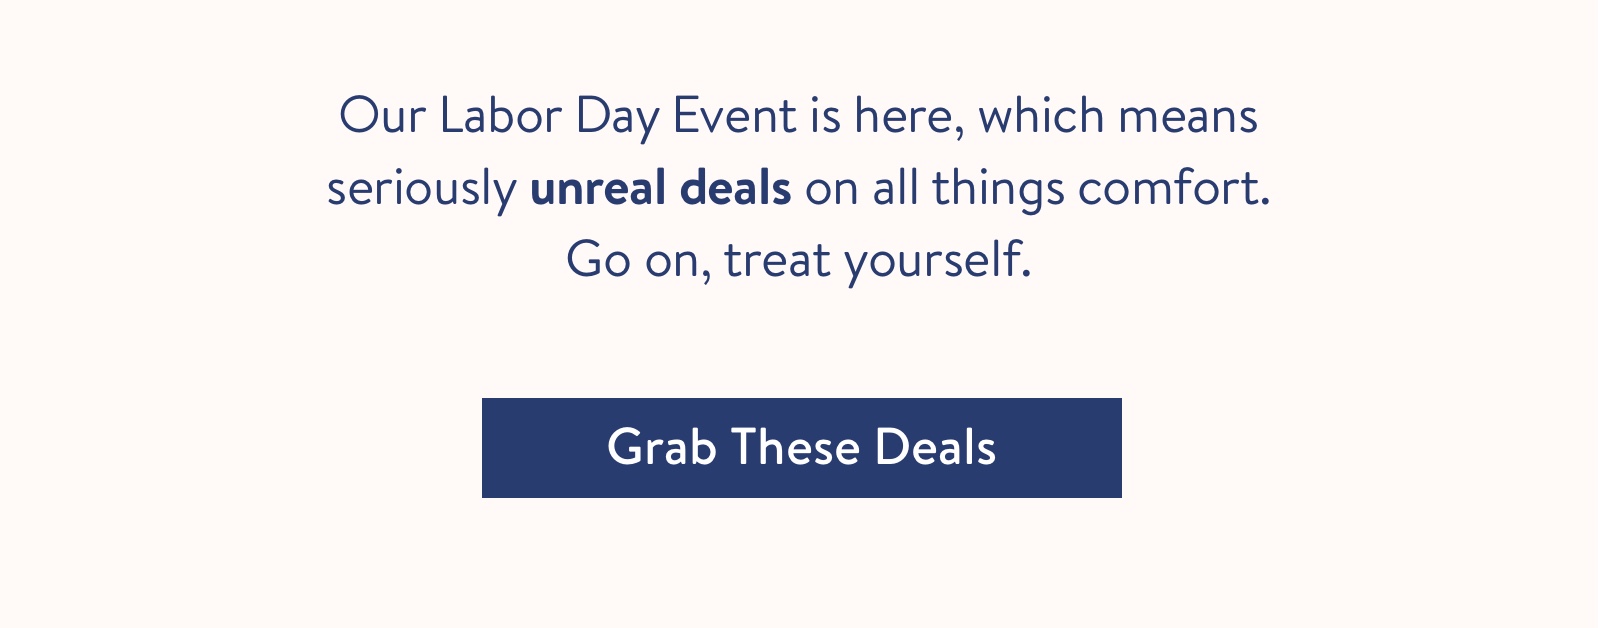 Our Labor Day Event is here, which means seriously unreal deals on all things comfort. Go on, treat yourself.